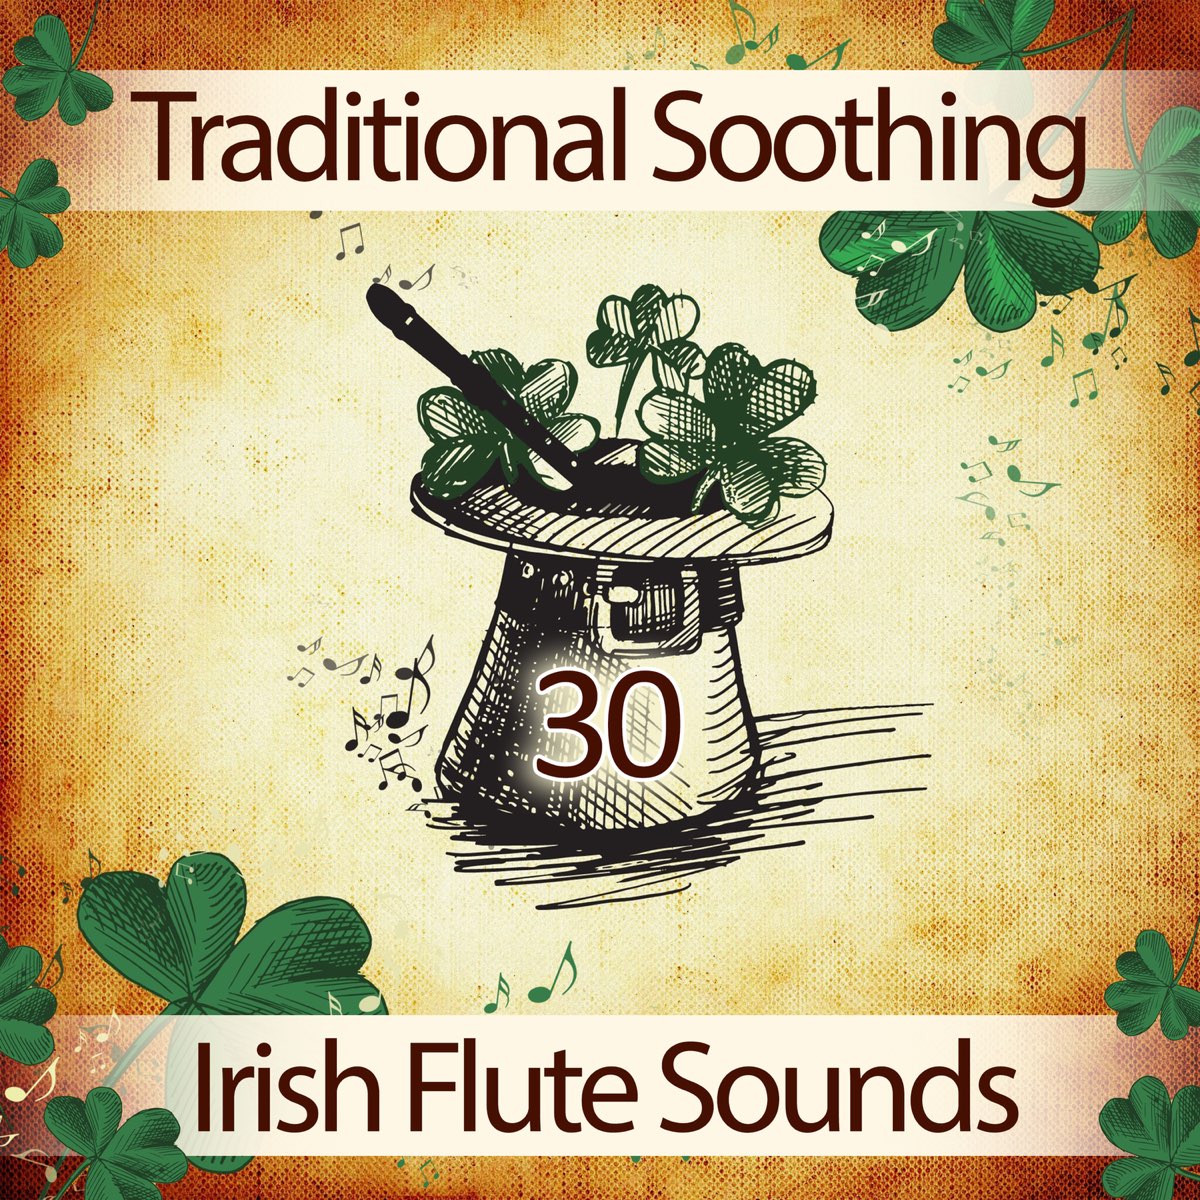 30 Traditional Soothing Irish Flute Sounds: Peaceful Relaxation, Pan Flute  Music for Meditation, Zen Wellbeing, New Age Instrumental Music, Yoga Art,  Celtic Harp & Lute - Album by Relaxing Flute Music Zone -